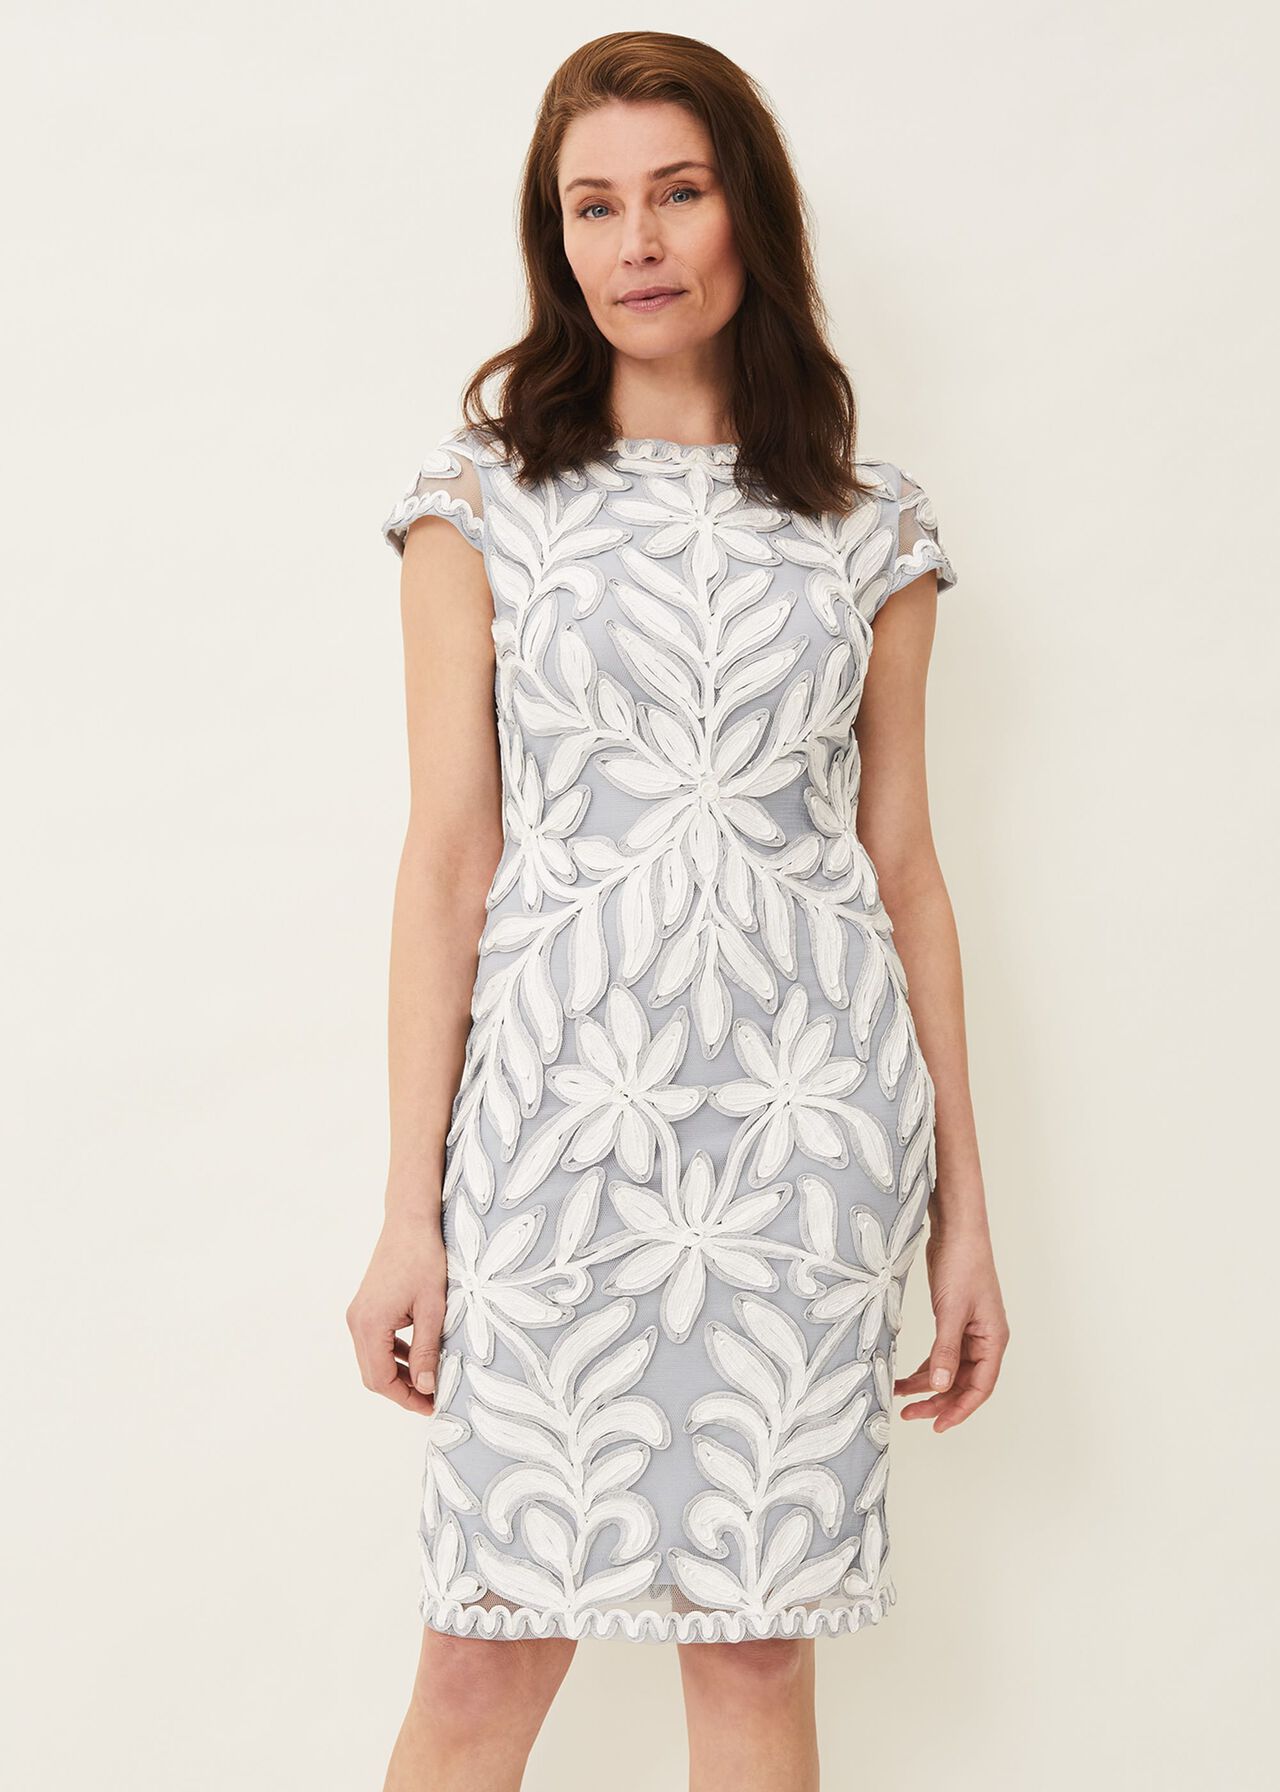 Isobel Tapework Lace Fitted Dress | Phase Eight